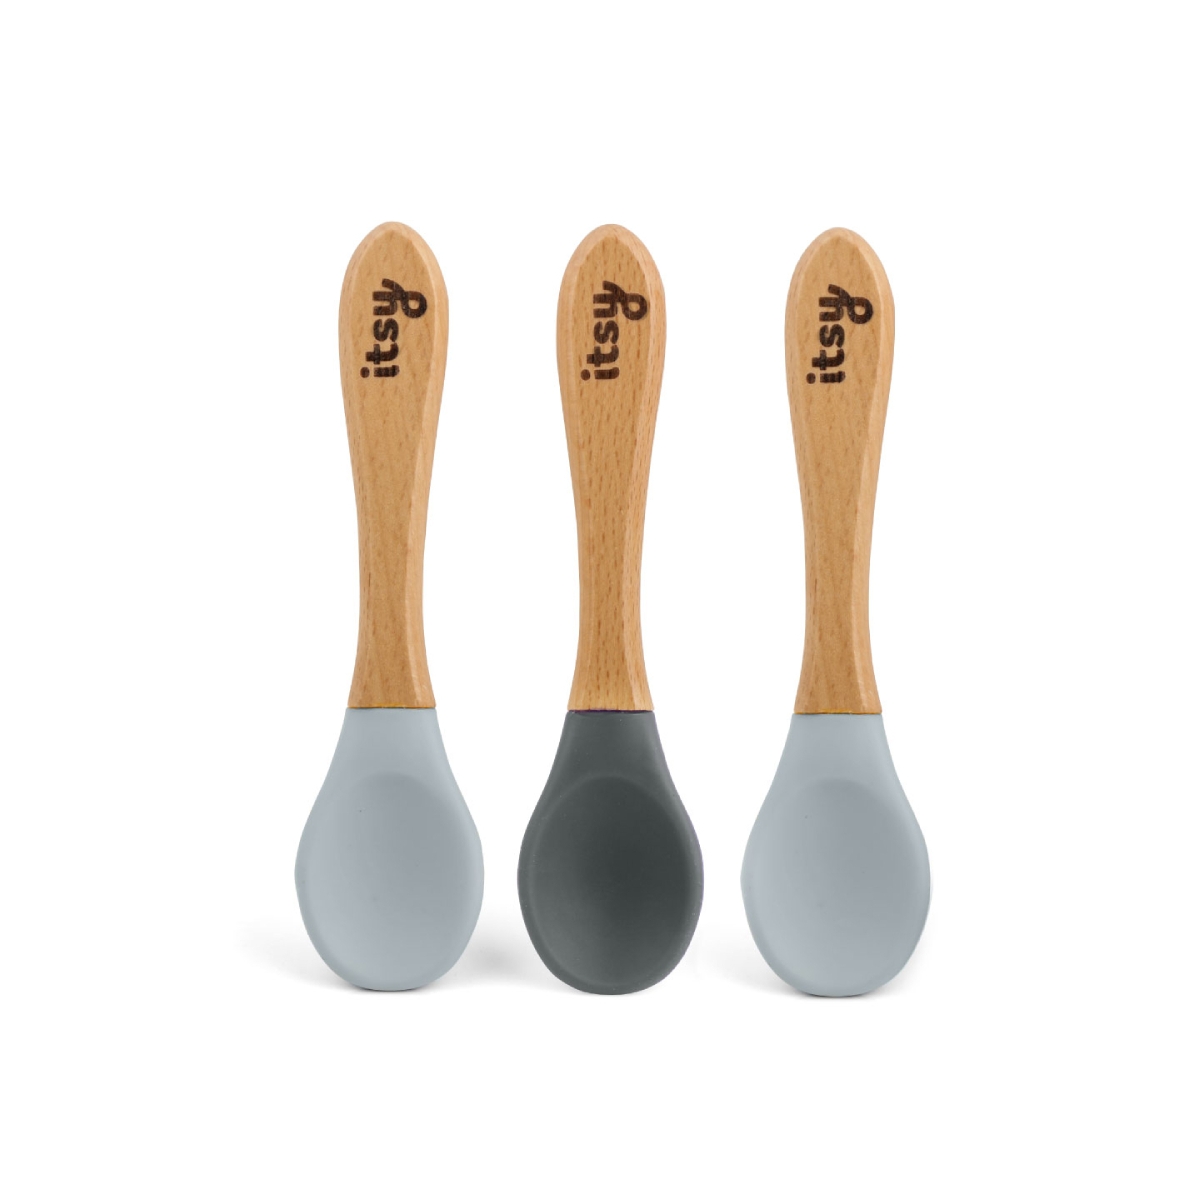 Itsy Spoonz Bamboo/Silicone 3 Pack